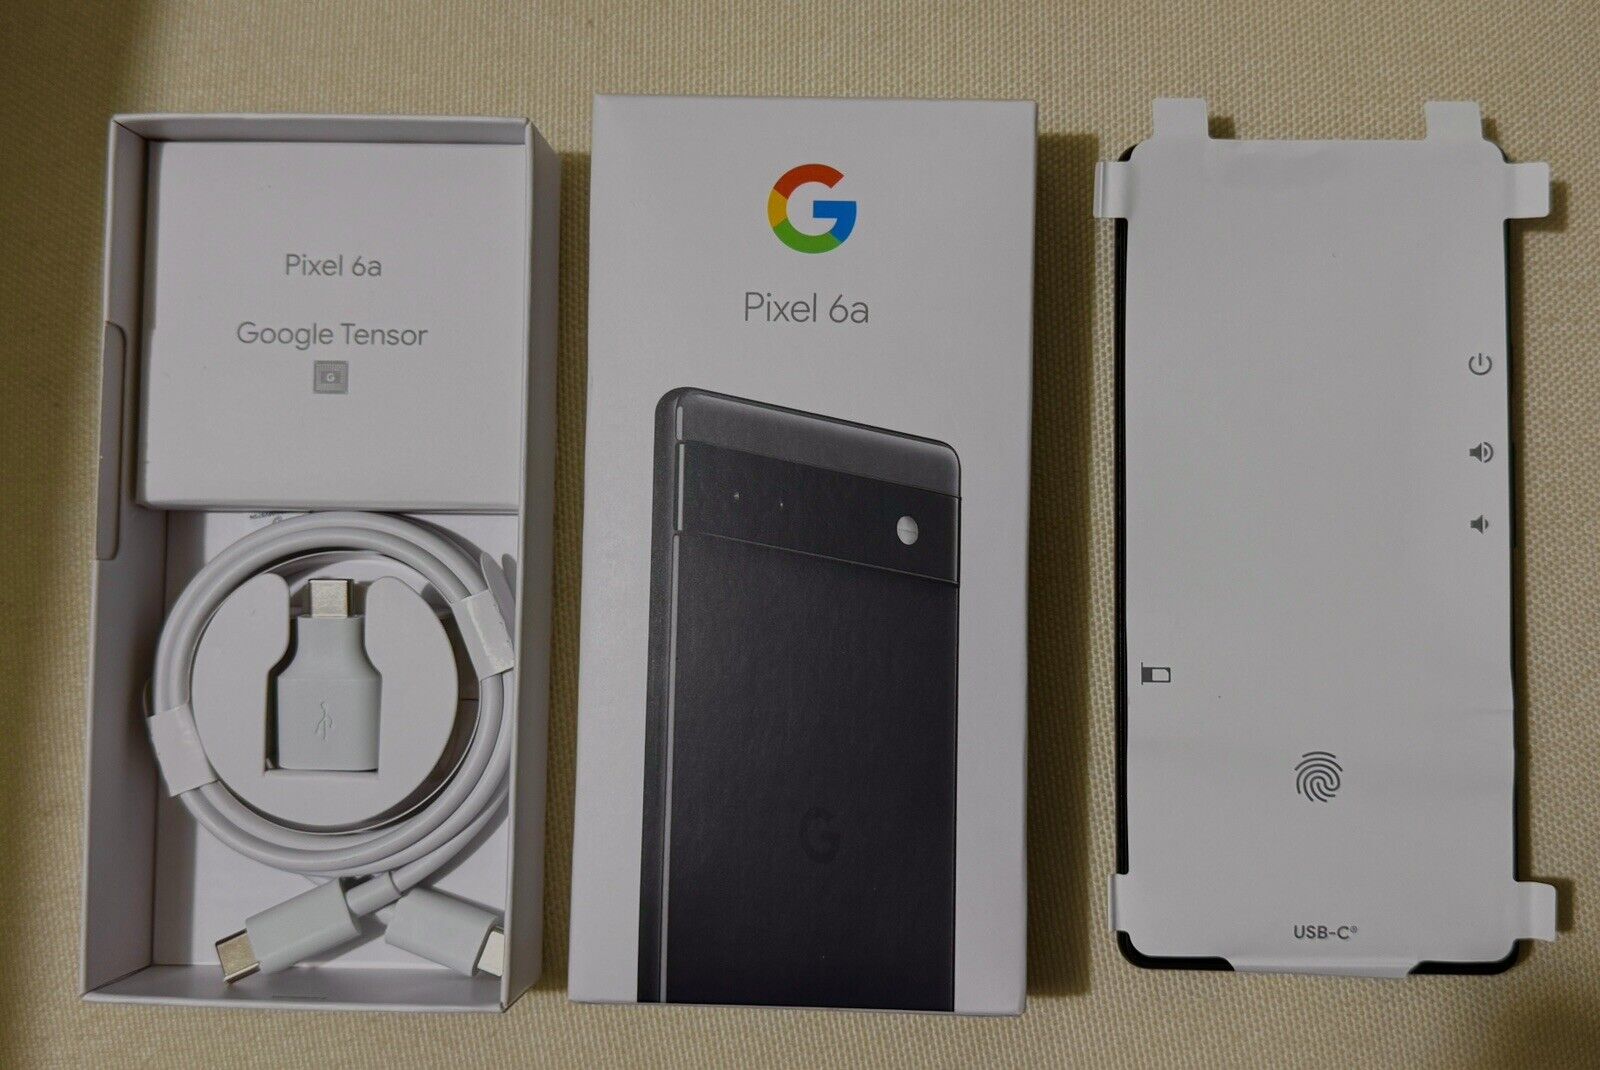 Google Pixel 6a 128GB/6GB 6.13" 5G Unlocked Android Smartphone - Charcoal